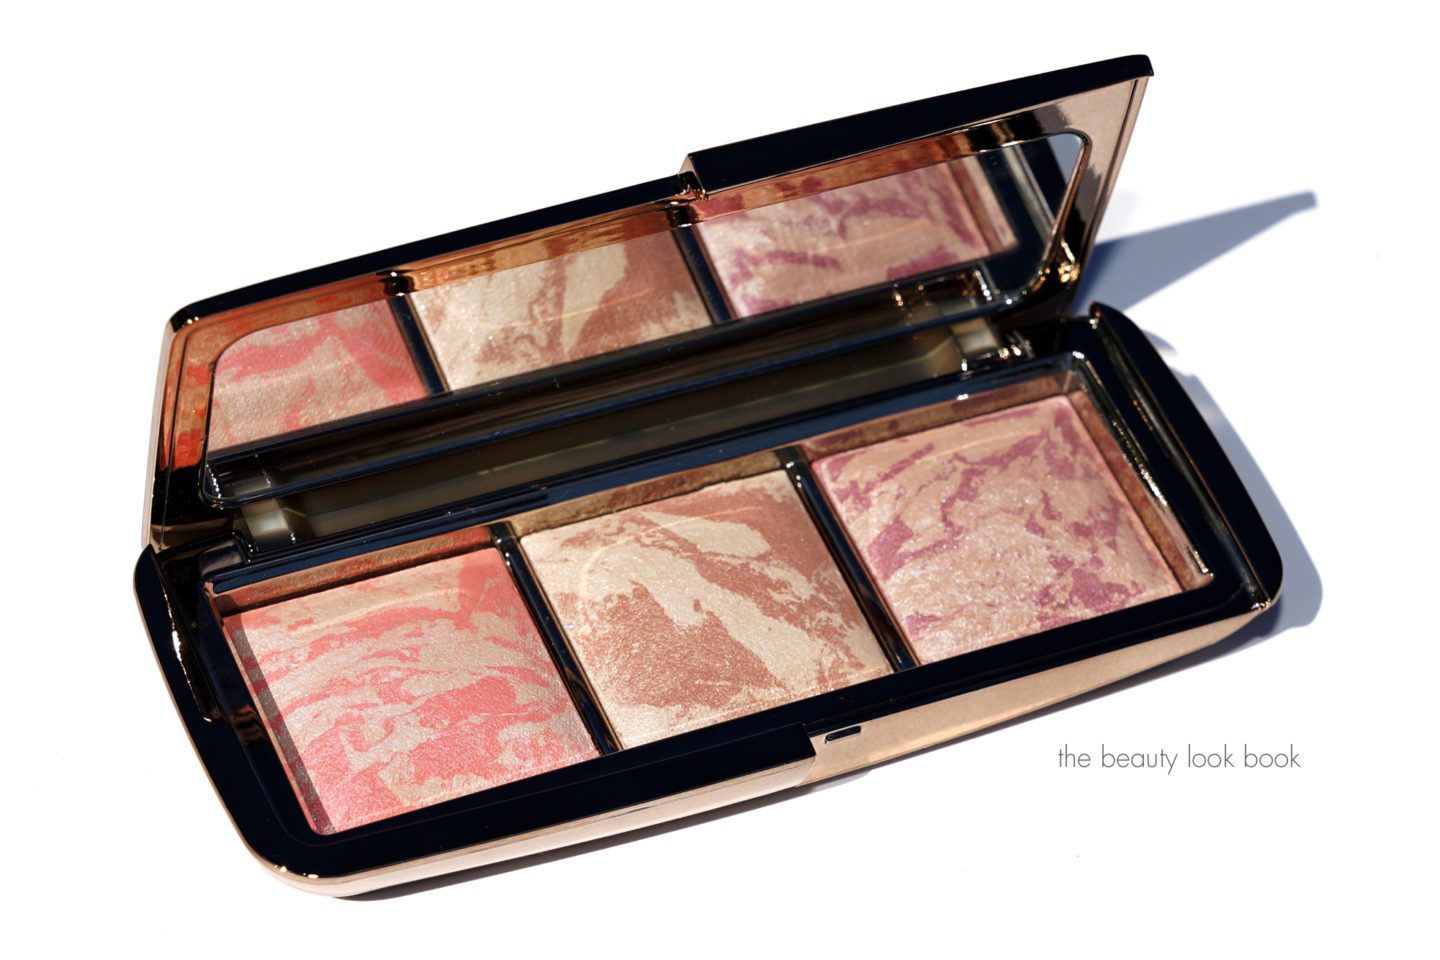 Hourglass Ambient Strobe Lighting Blush Palette reviewed from The Beauty Look Book Blog